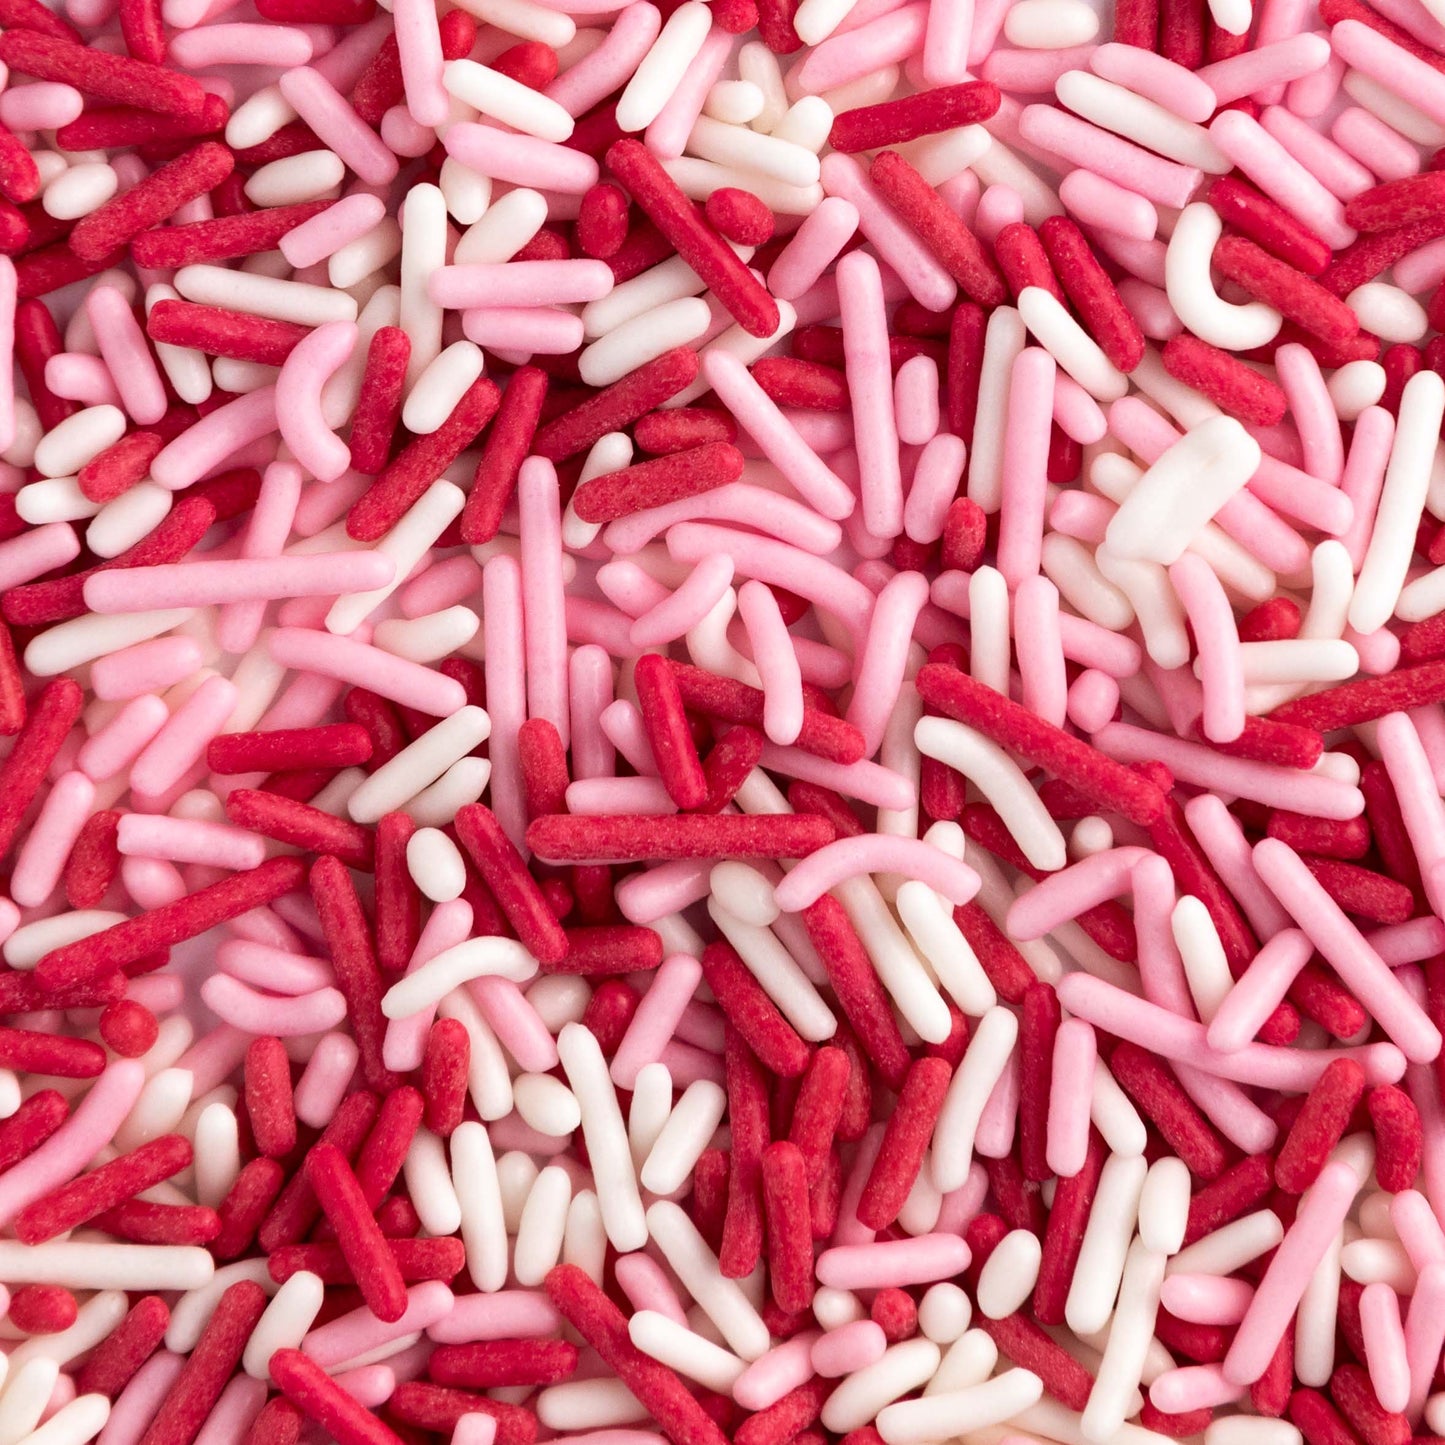 Natural Red, White & Pink Jimmies